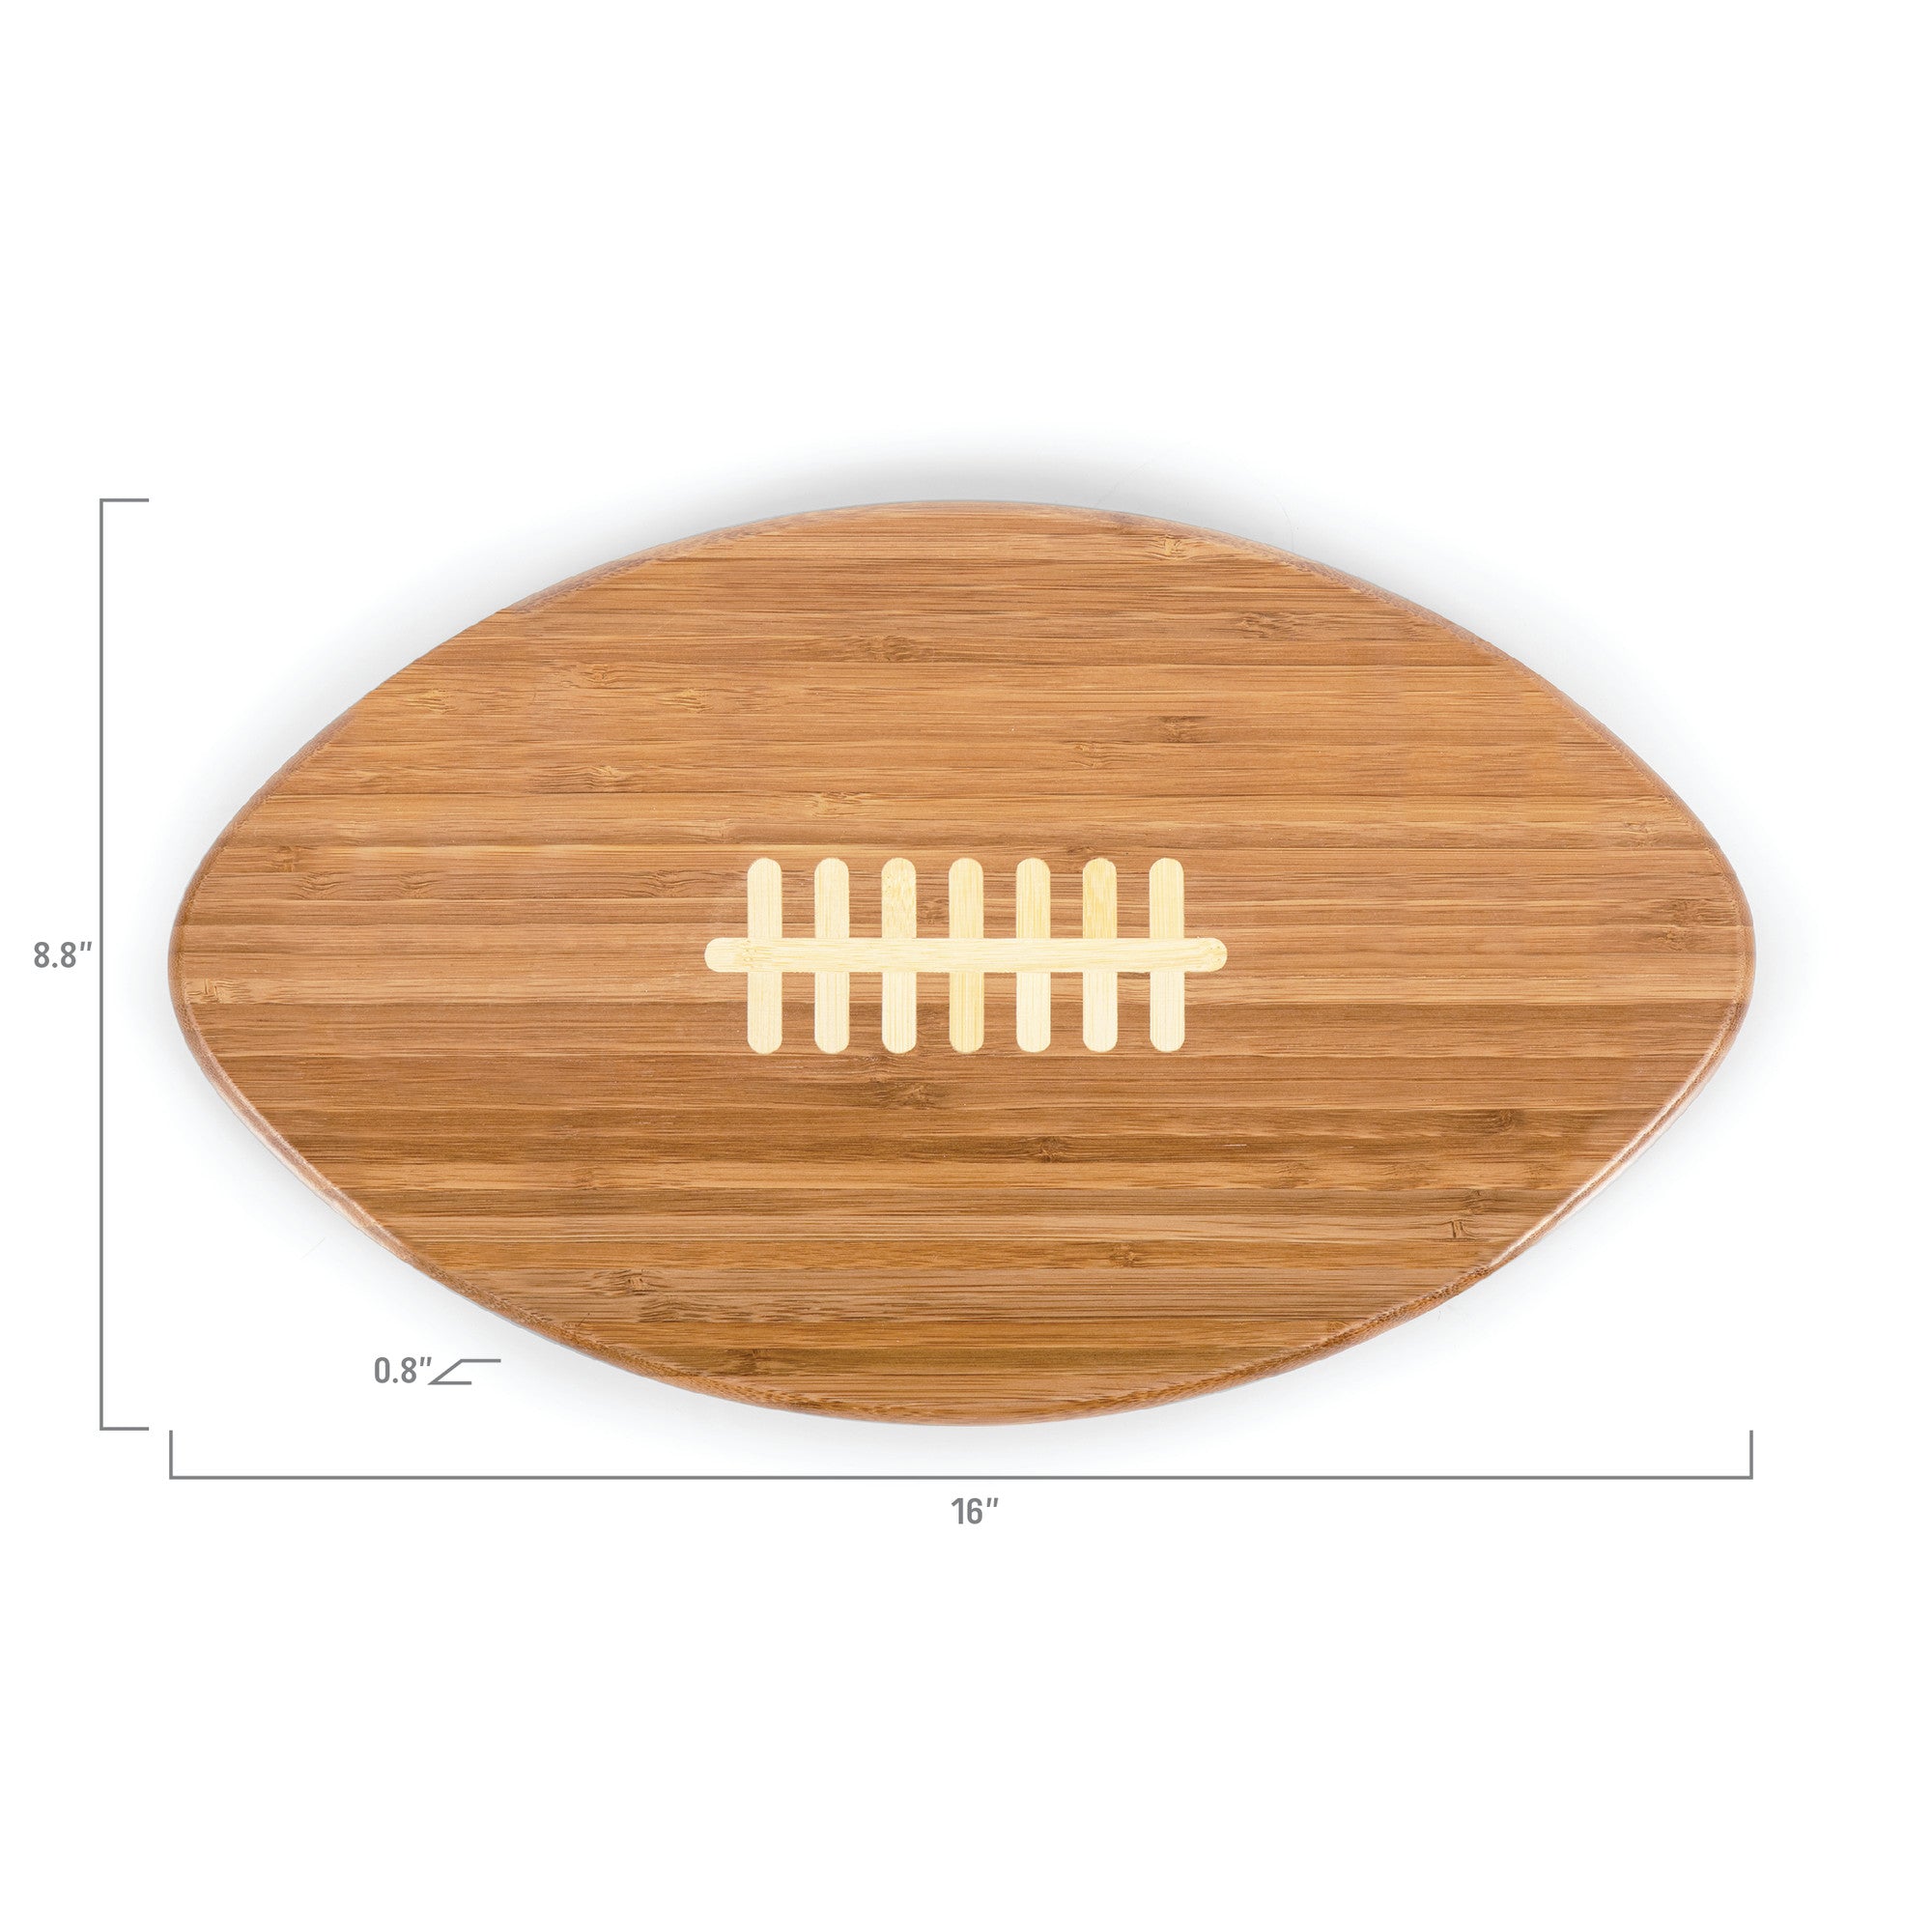 NFL 100 - Touchdown! Football Cutting Board & Serving Tray